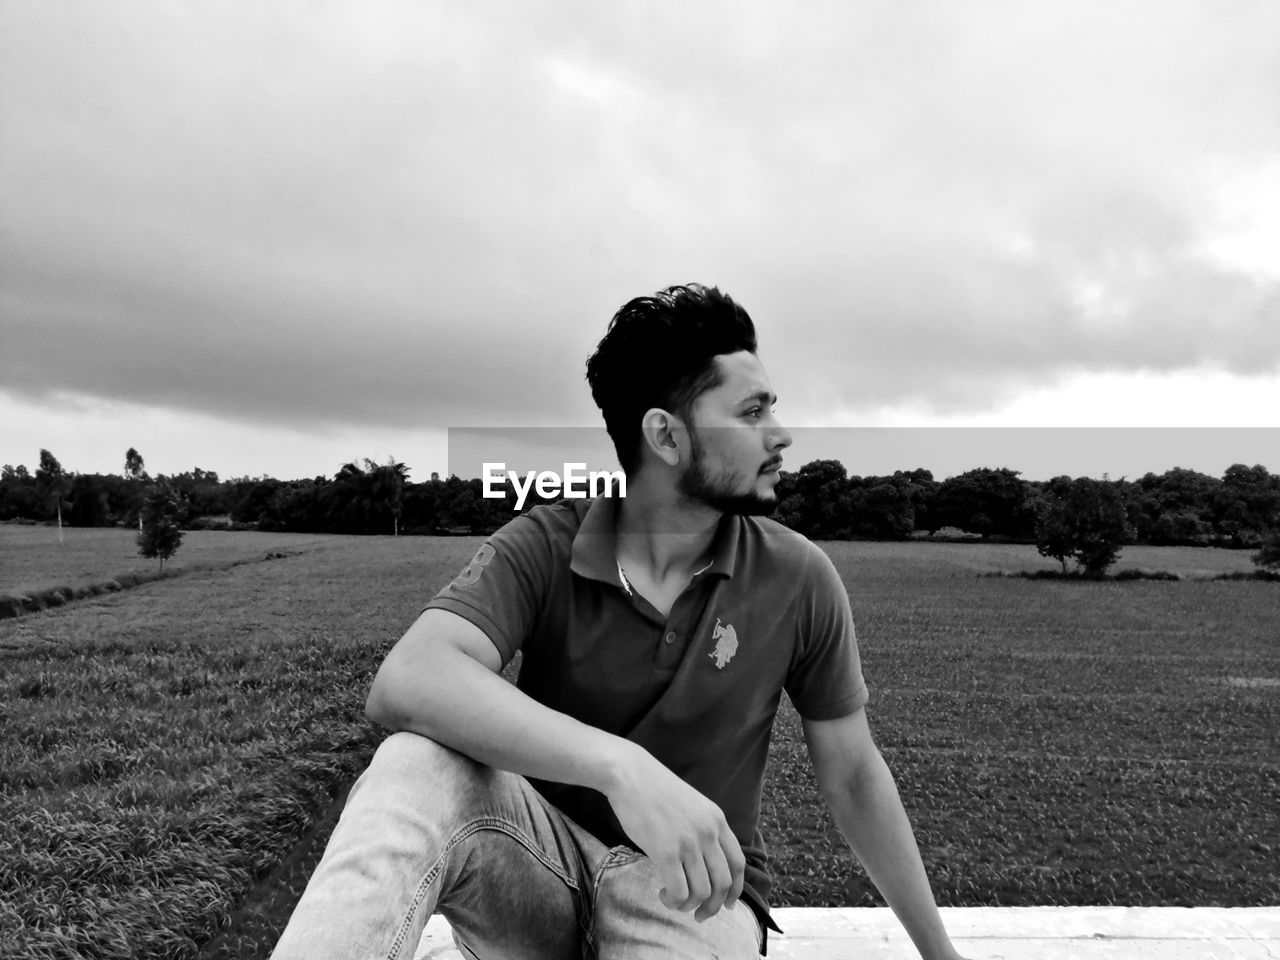 YOUNG MAN LOOKING AWAY WHILE SITTING ON LAND AGAINST SKY